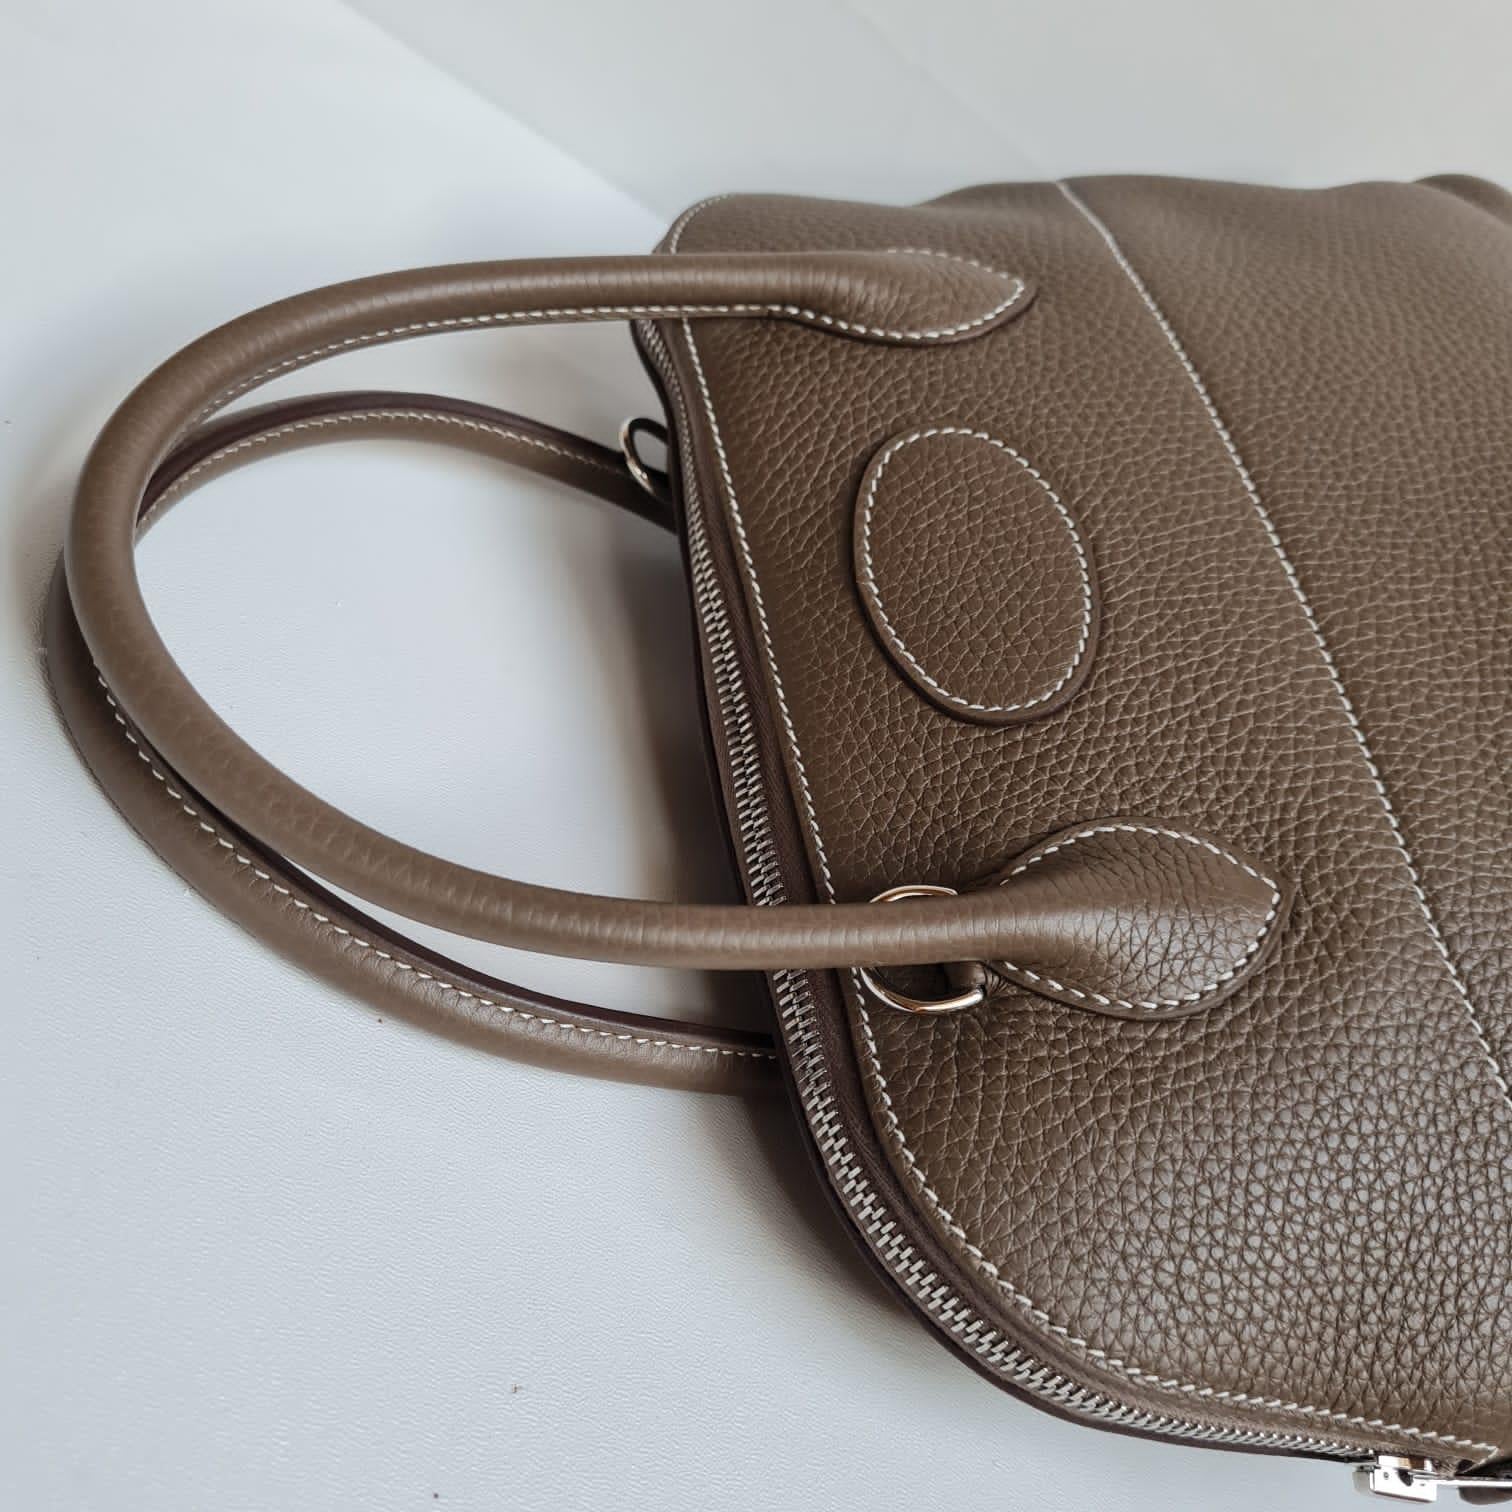 New never worn bolide 31 etoupe bag with palladium hardware. Beautiful classic color and shape. Stamp Y (2020). An absolute classic bag and shape, perfect for everyday. Comes with its dust bag, strap, padlock, keys, clochette, receipt (scribbled).